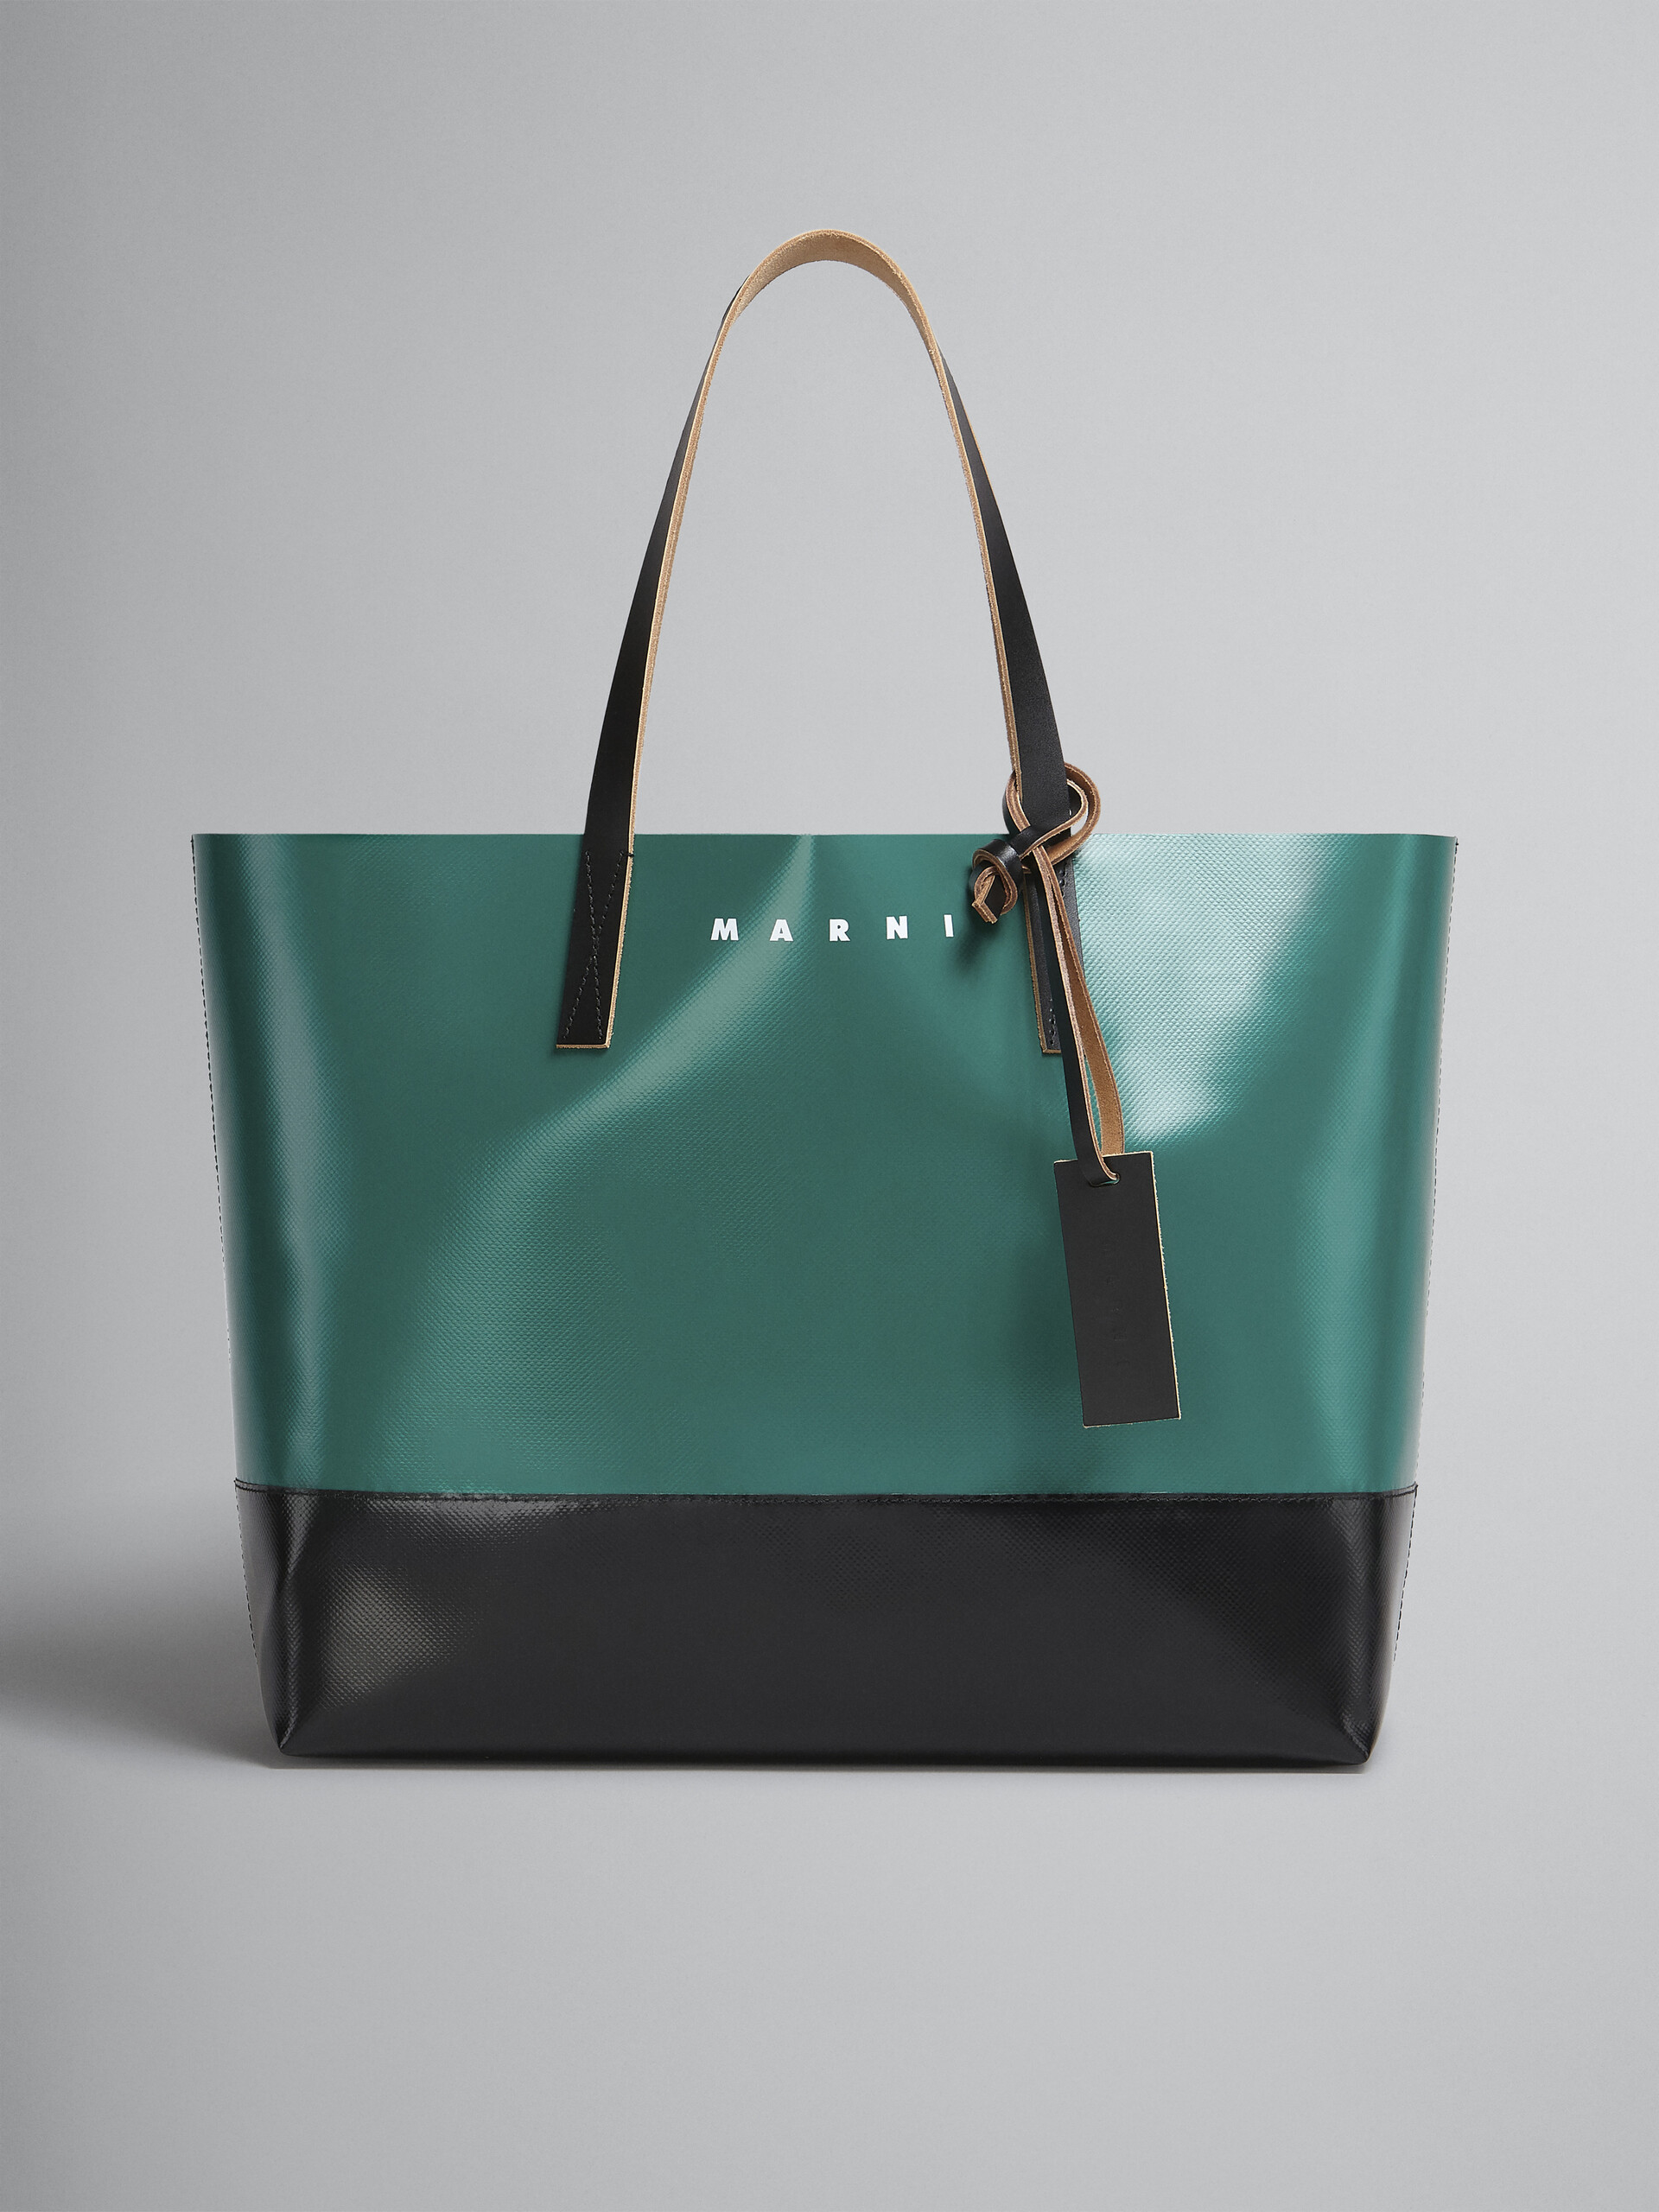 Tribeca shopping bag in green and black - Shopping Bags - Image 1